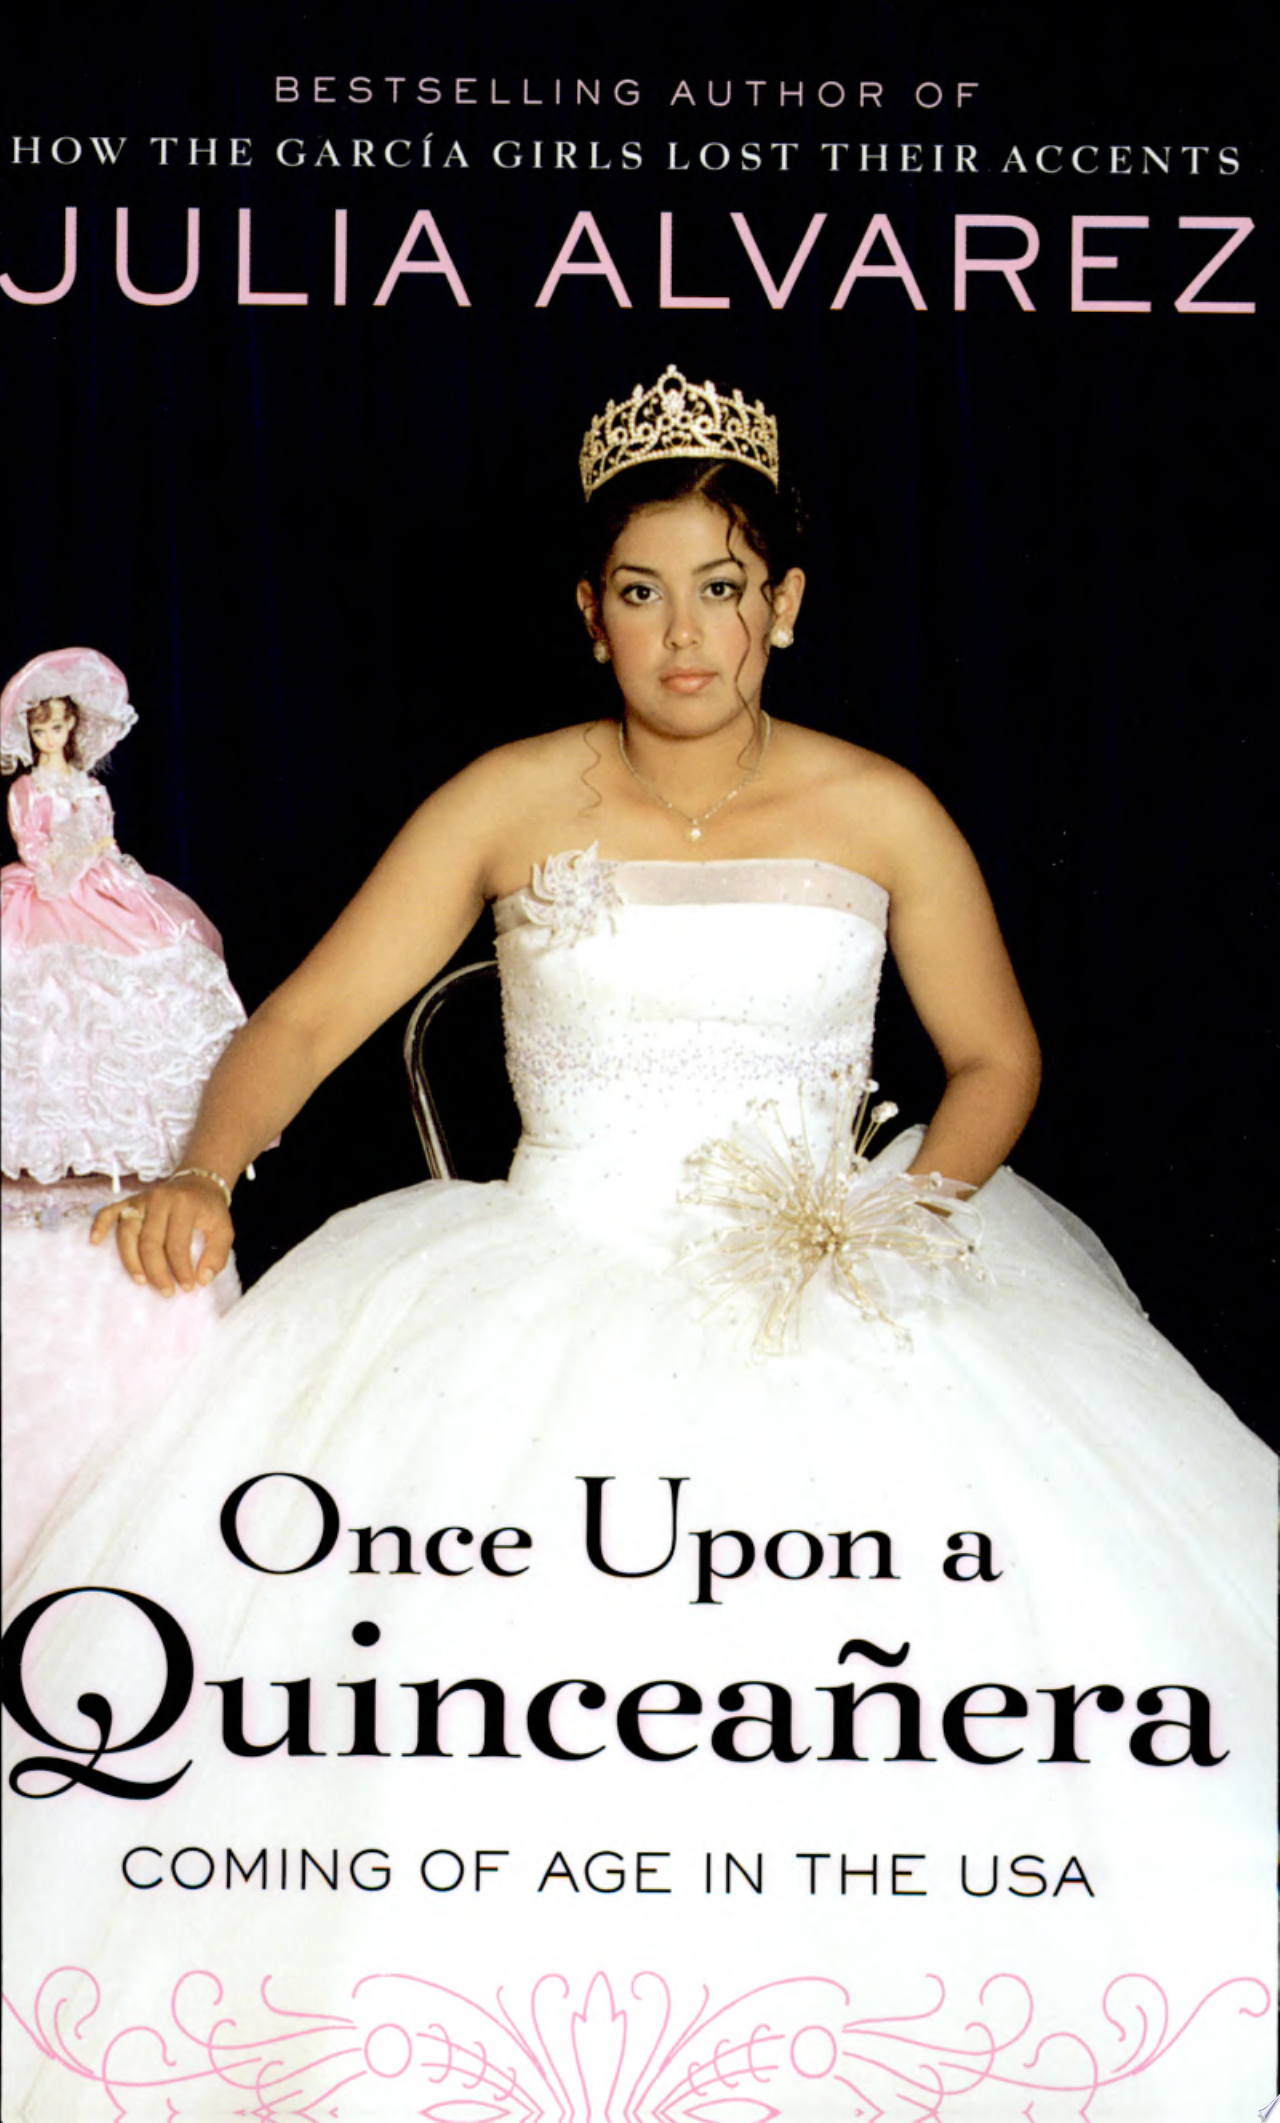 Image for "Once Upon a Quinceañera: coming of age in the USA"